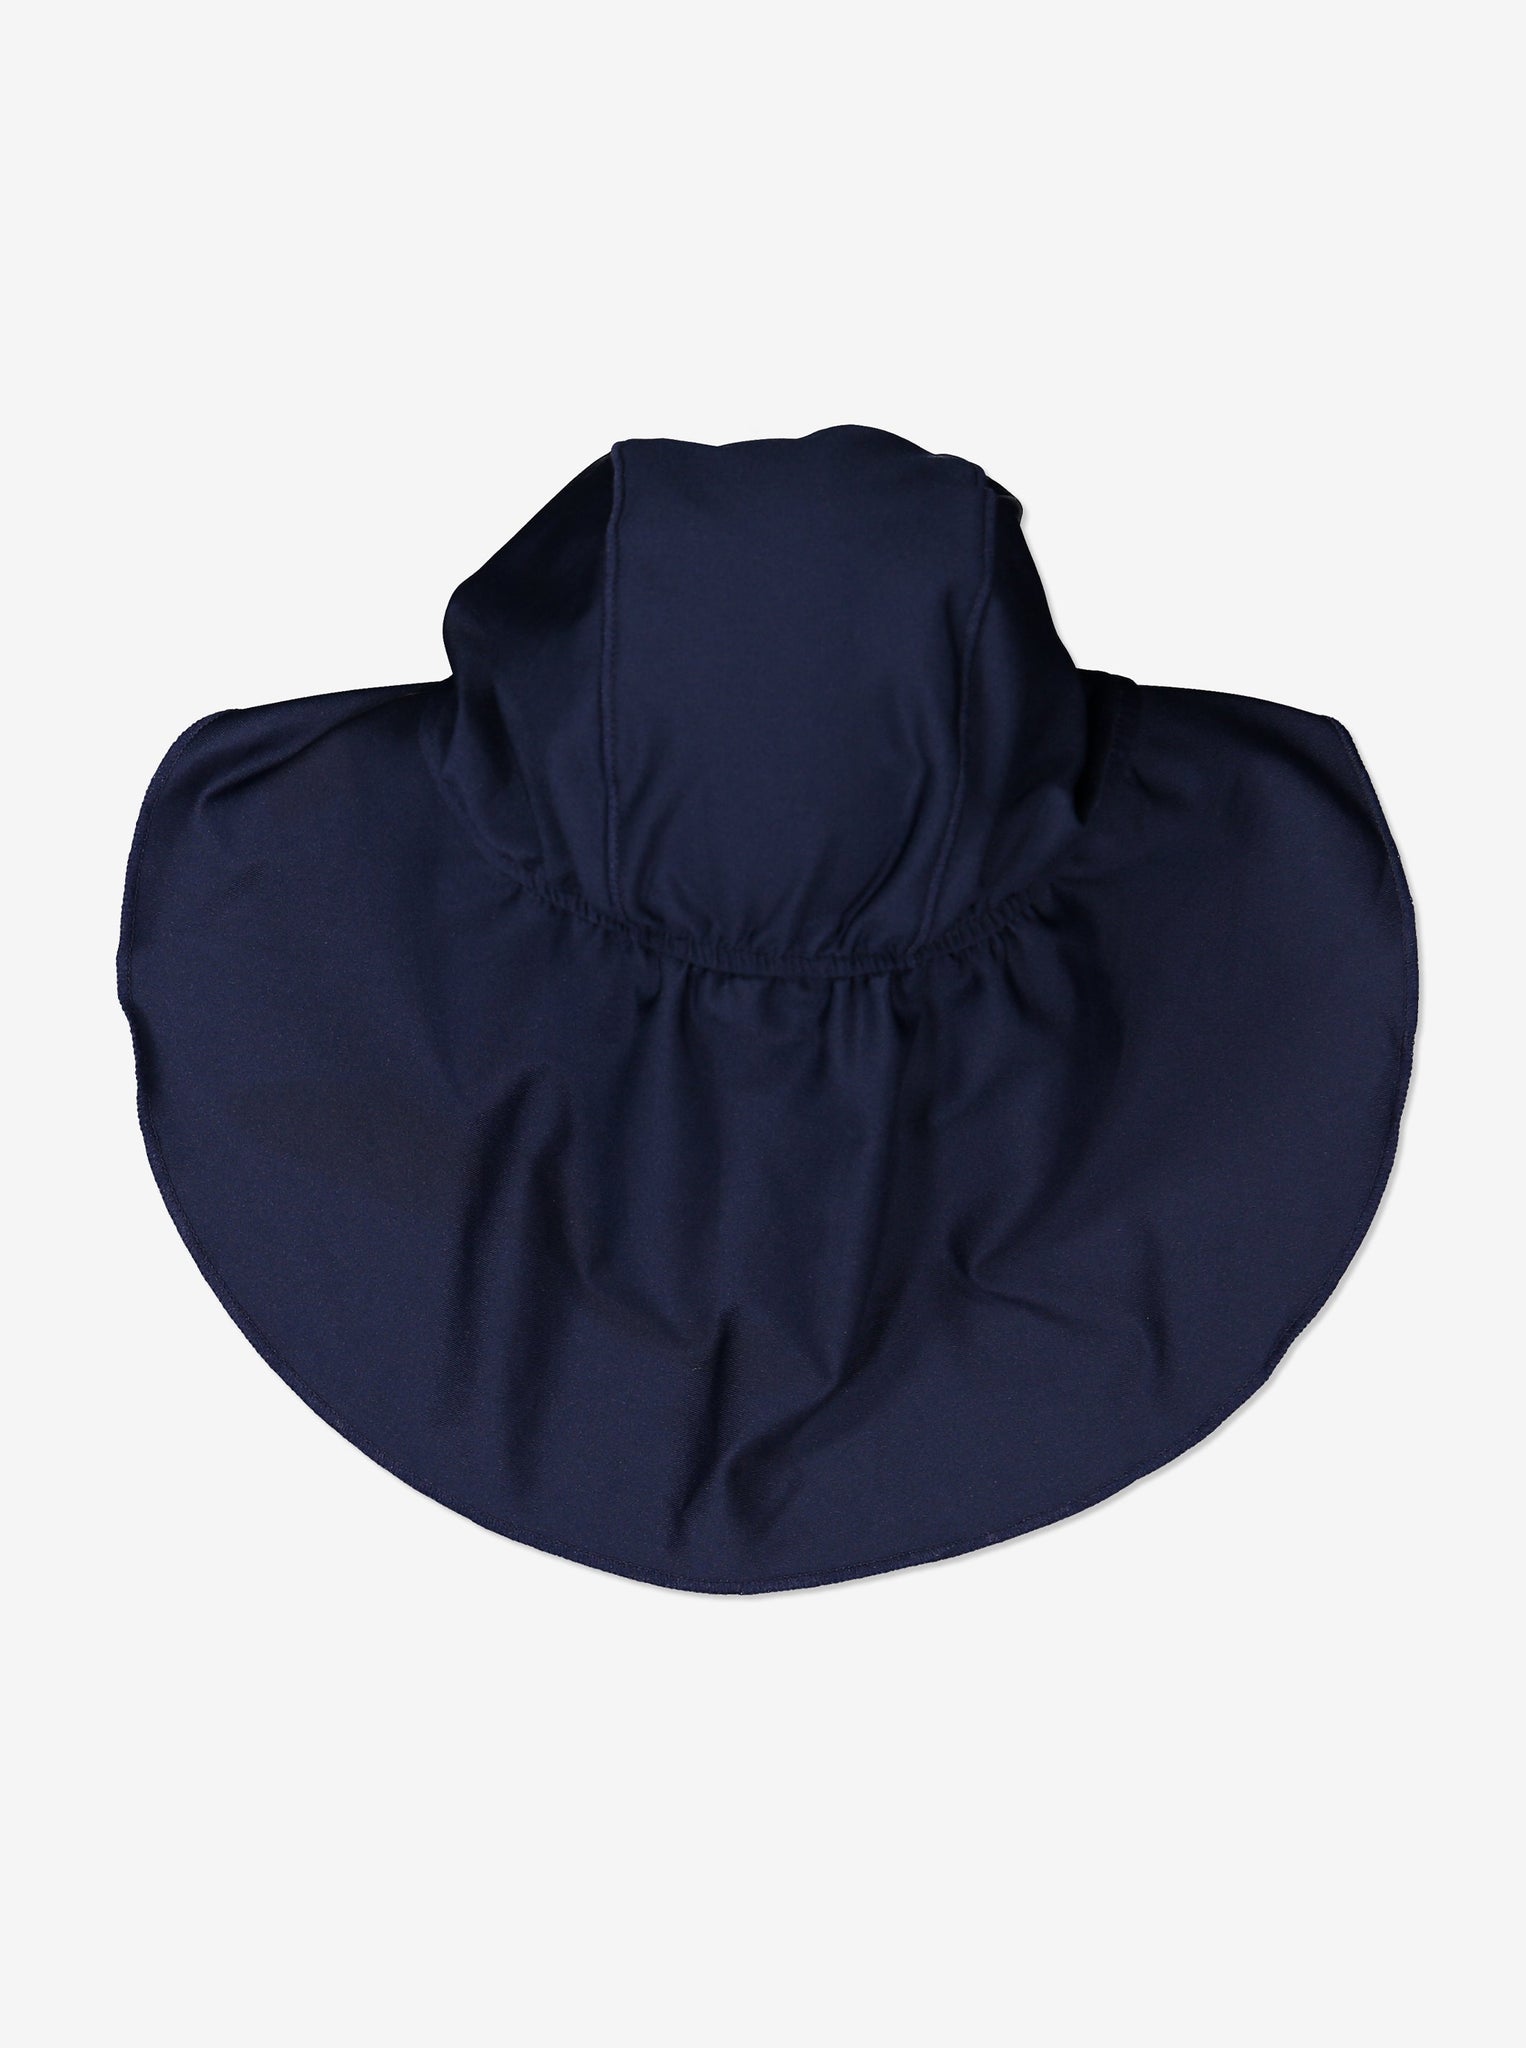 Navy Legionnaires Baby Hat from the Polarn O. Pyret kidswear collection. Kids outerwear made from sustainably source materials